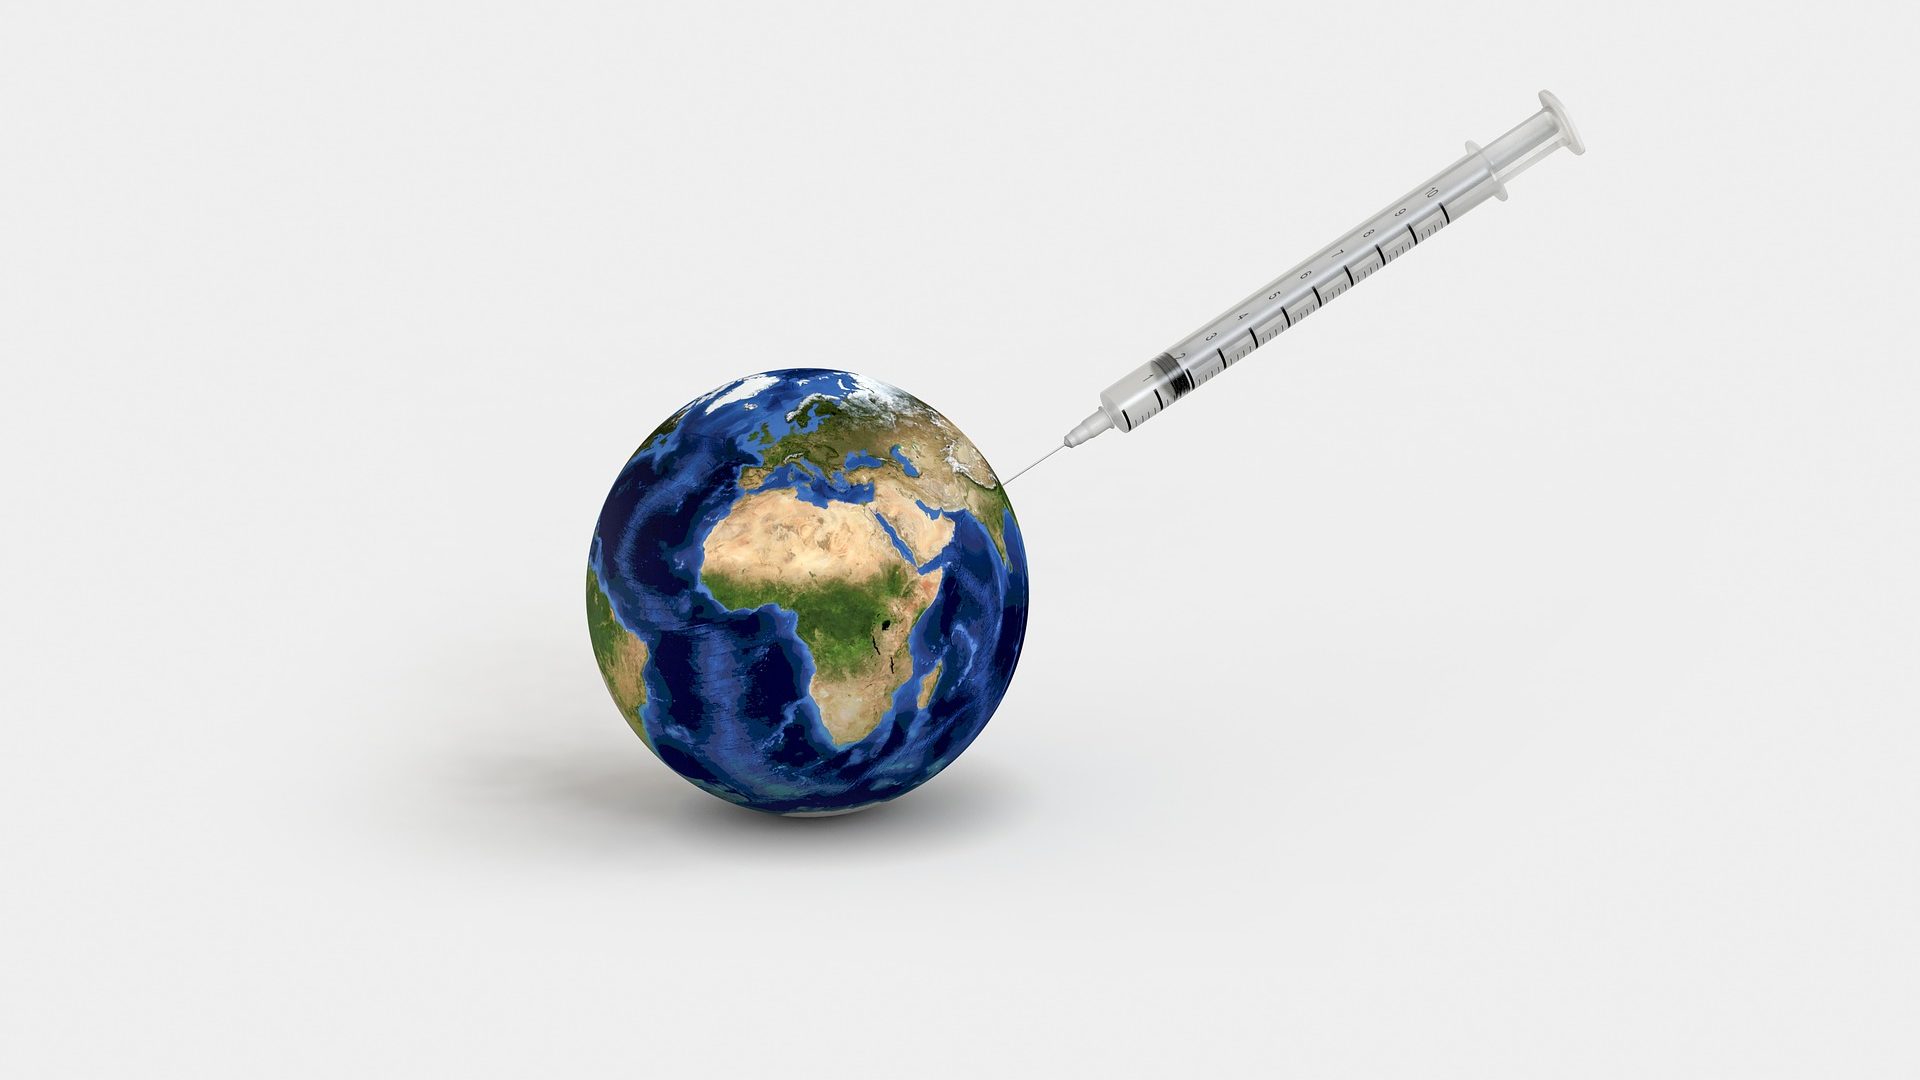 Prospects for COVID-19 Vaccination Vary Widely Across Middle East